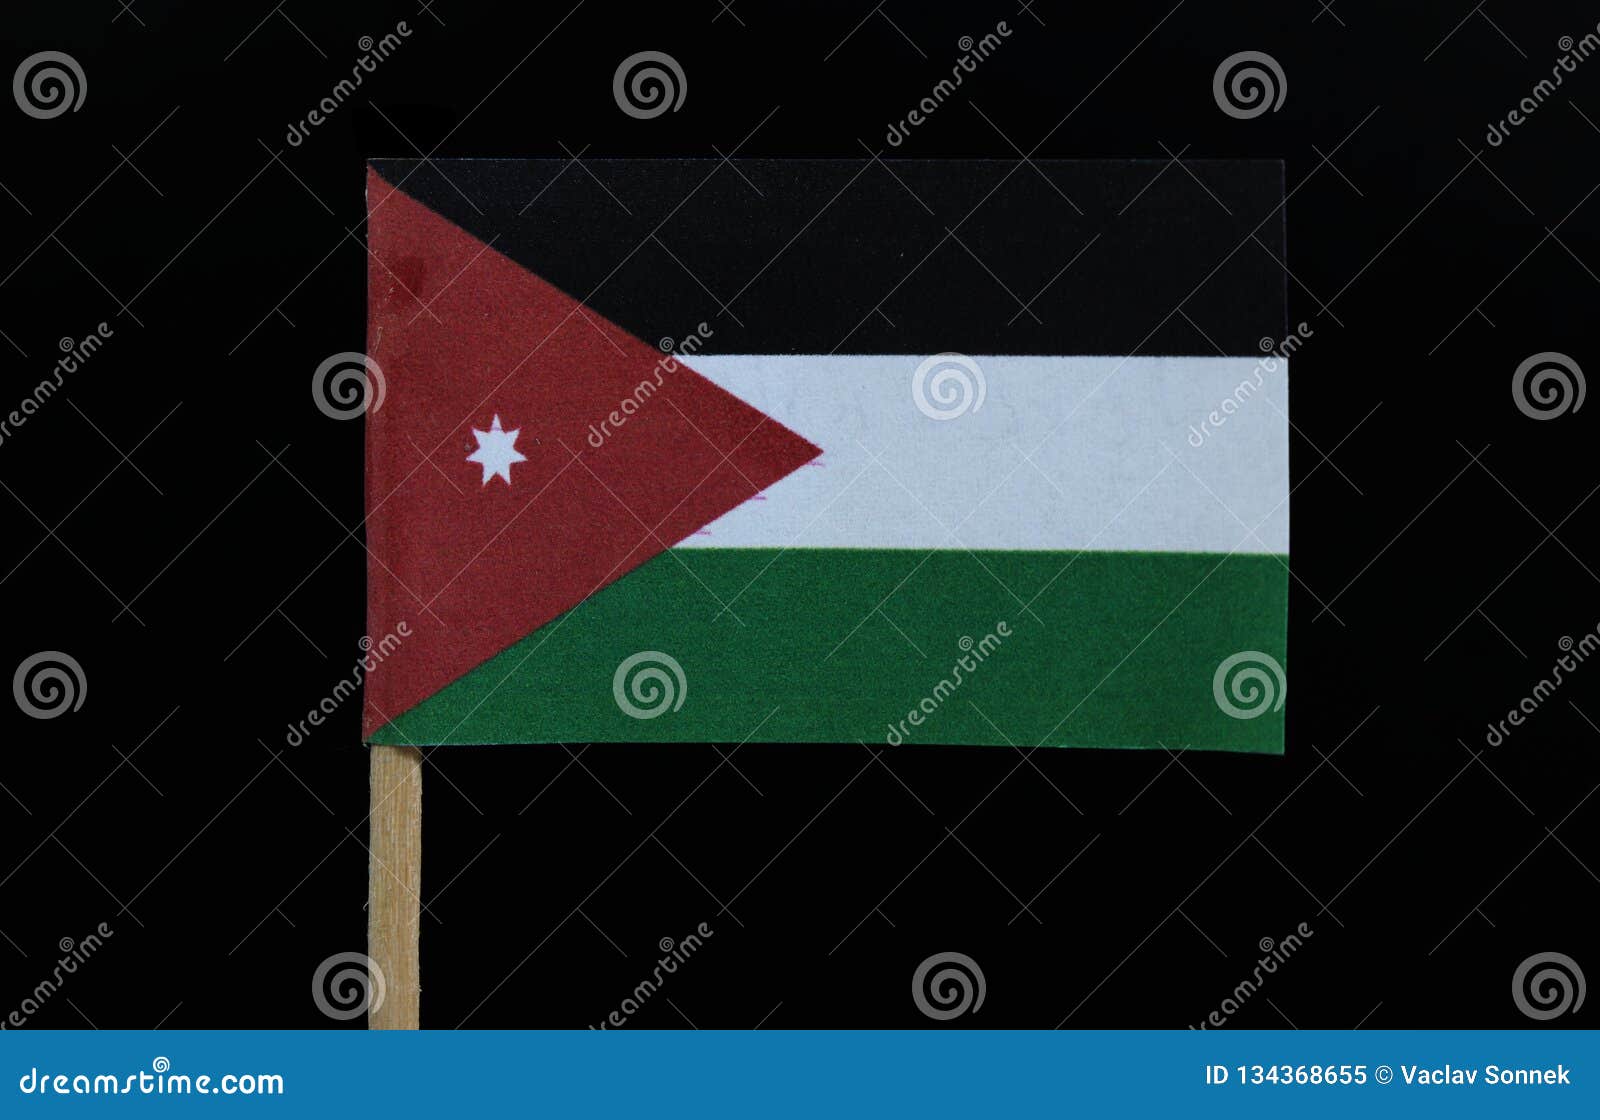 a official and unique flag of jordan on toothpick on black background. a horizontal triband of black, white and green; with a red